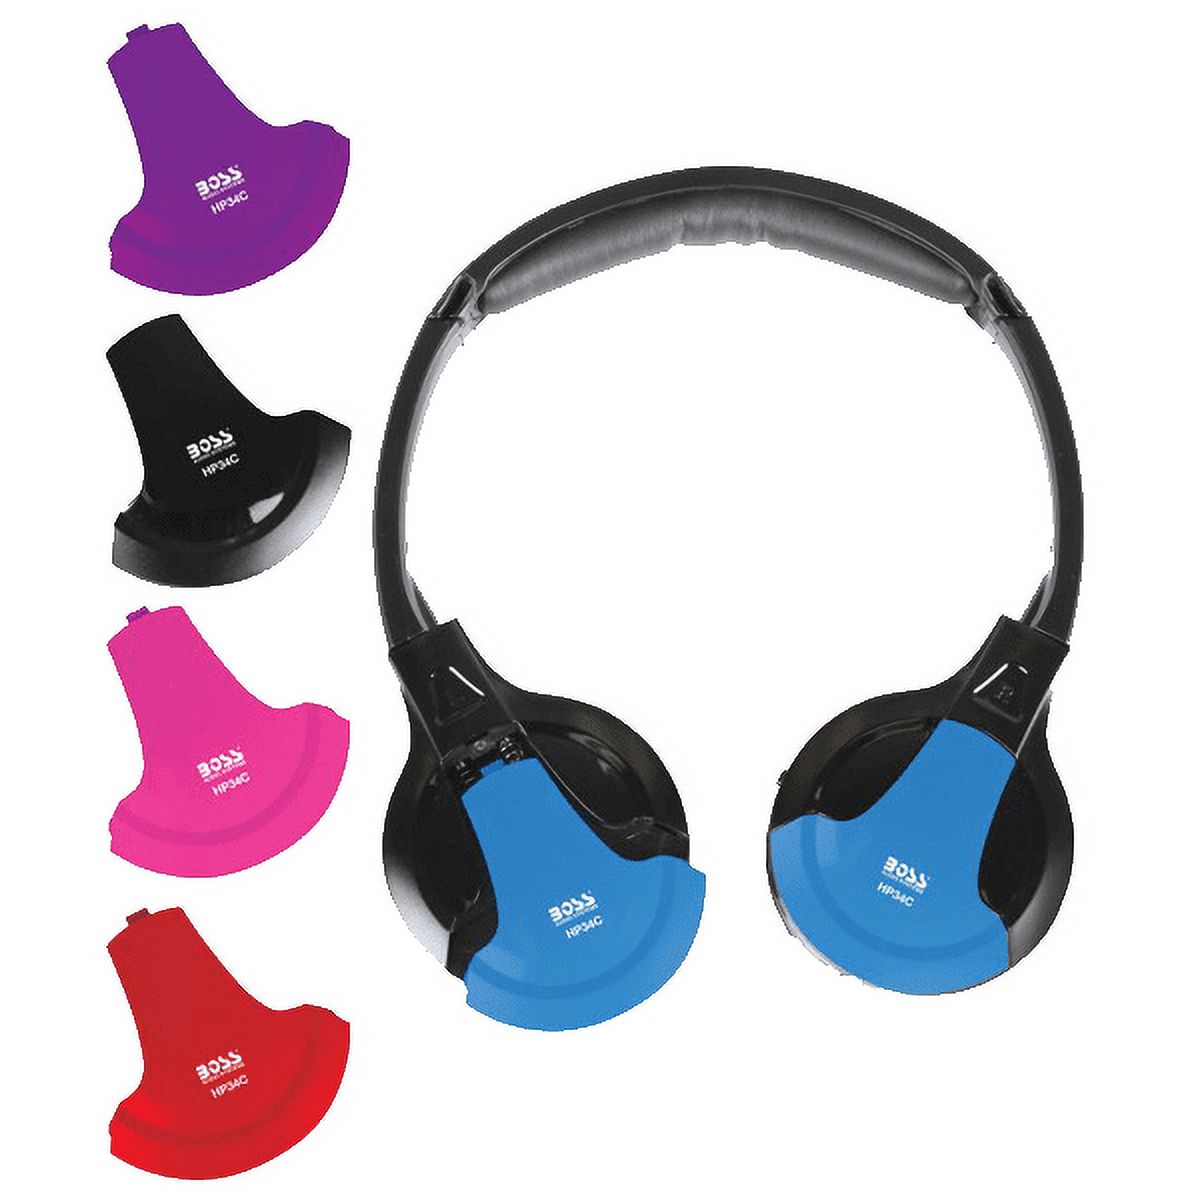 BOSS Audio Systems HP34C Dual Channel Foldable Wireless Headphone, Multi Colors - image 1 of 17